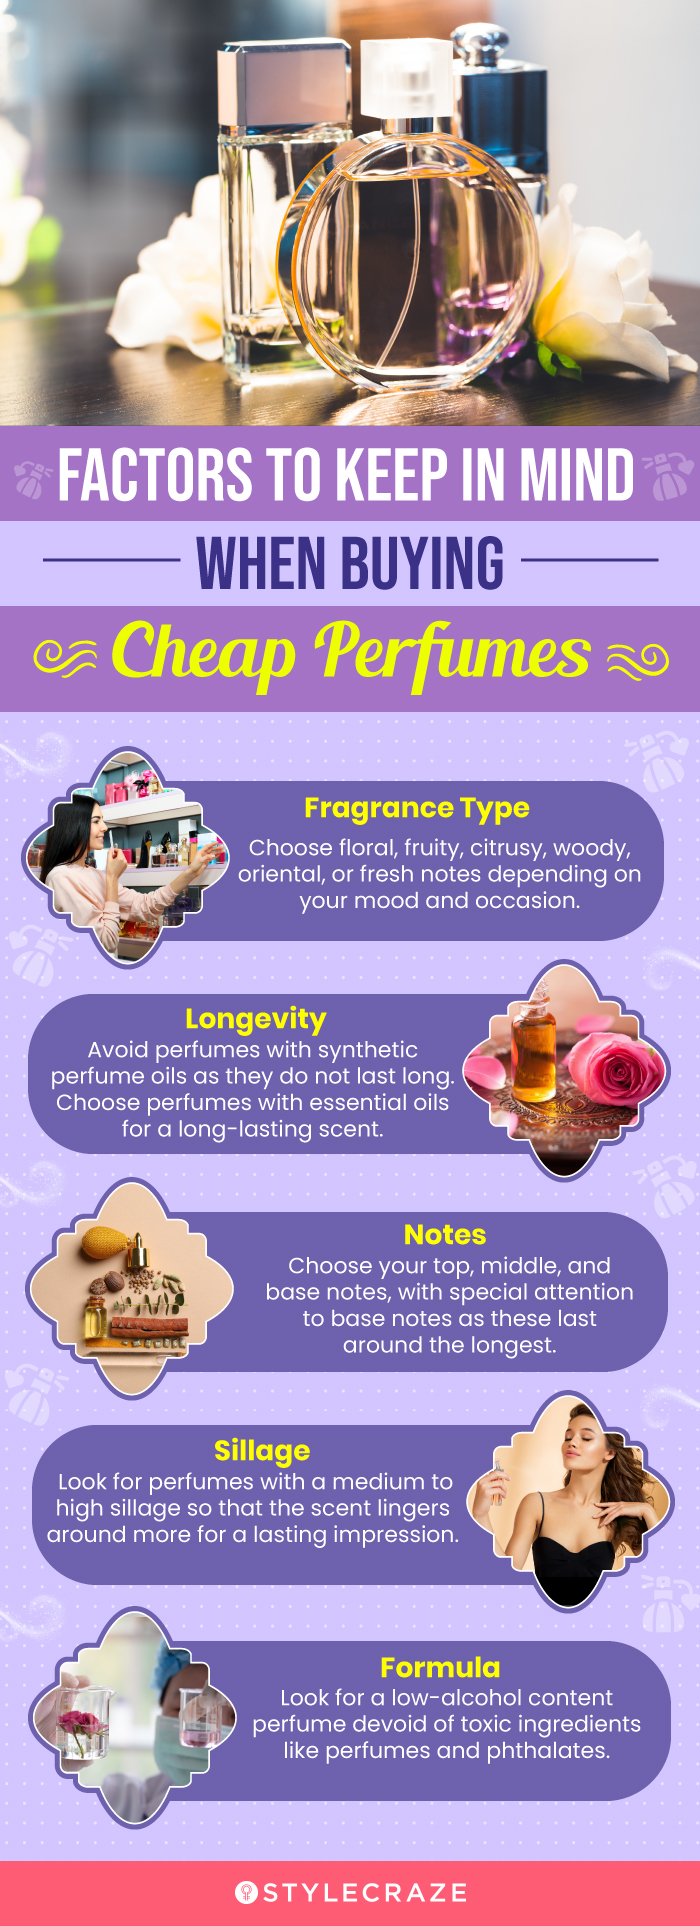 Factors To Keep In Mind When Buying Cheap Perfumes  [infographic]